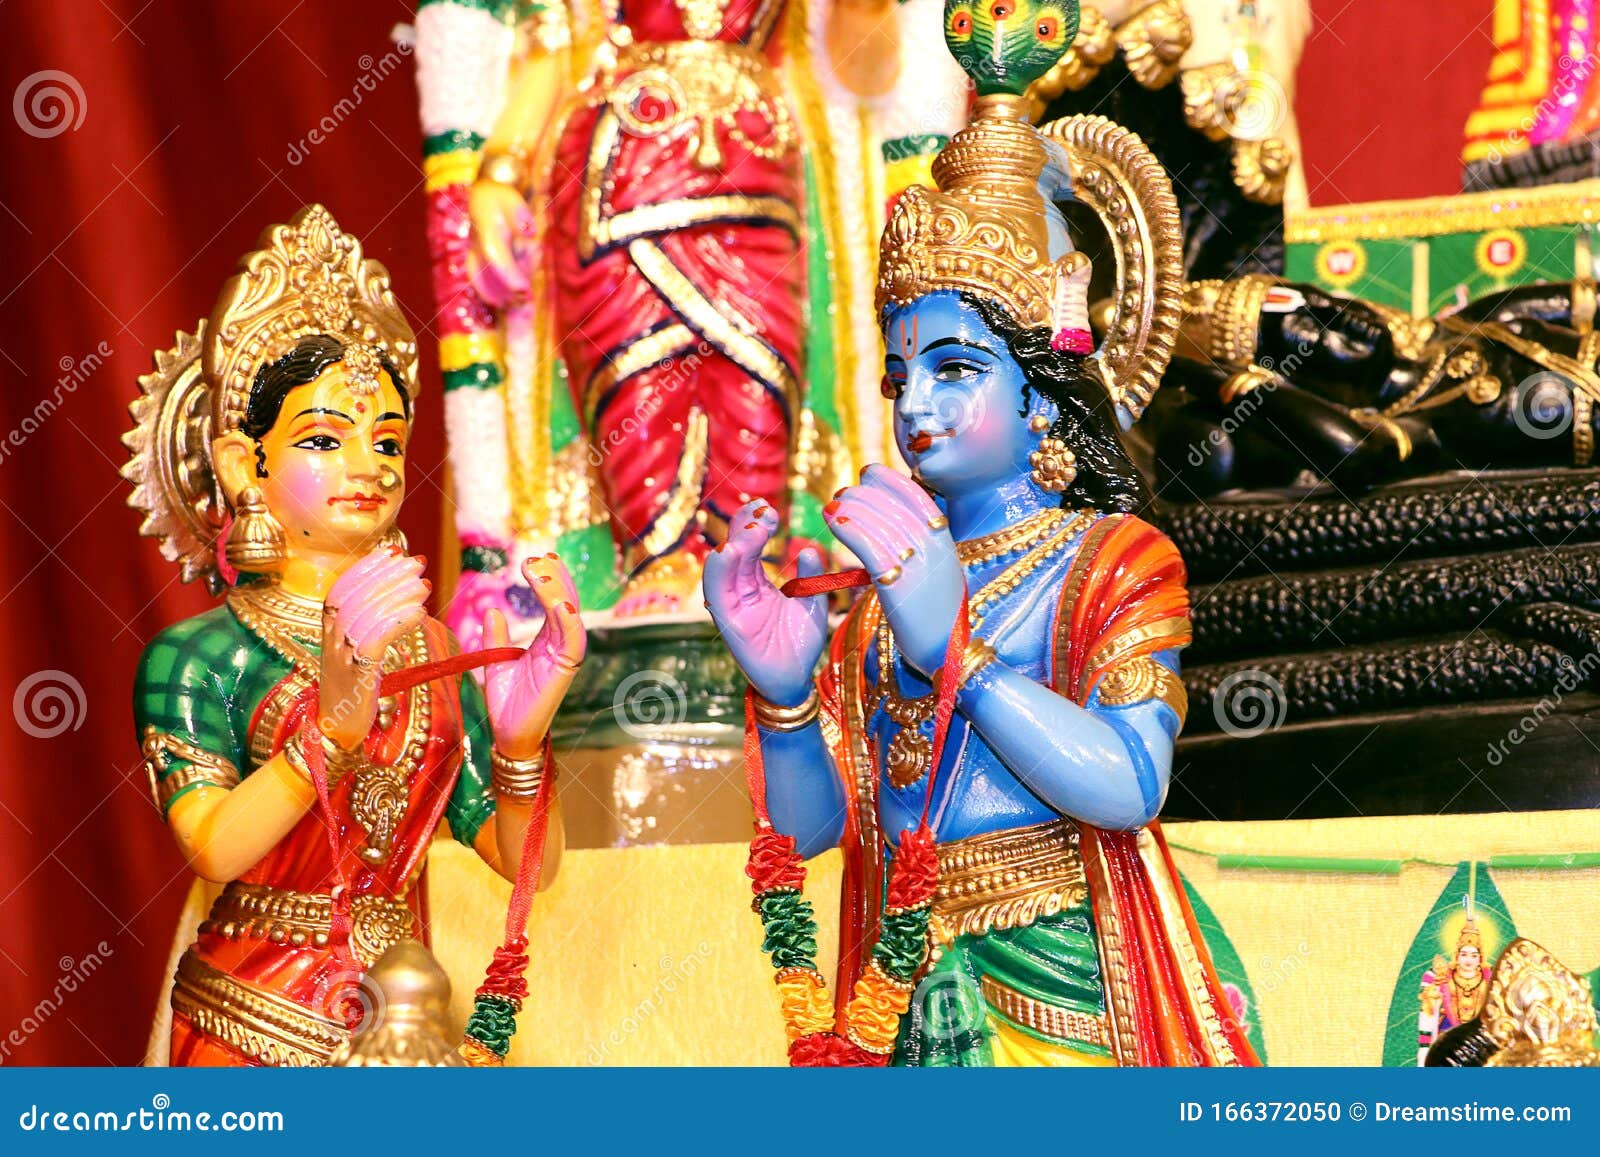 lord krishna with his consort